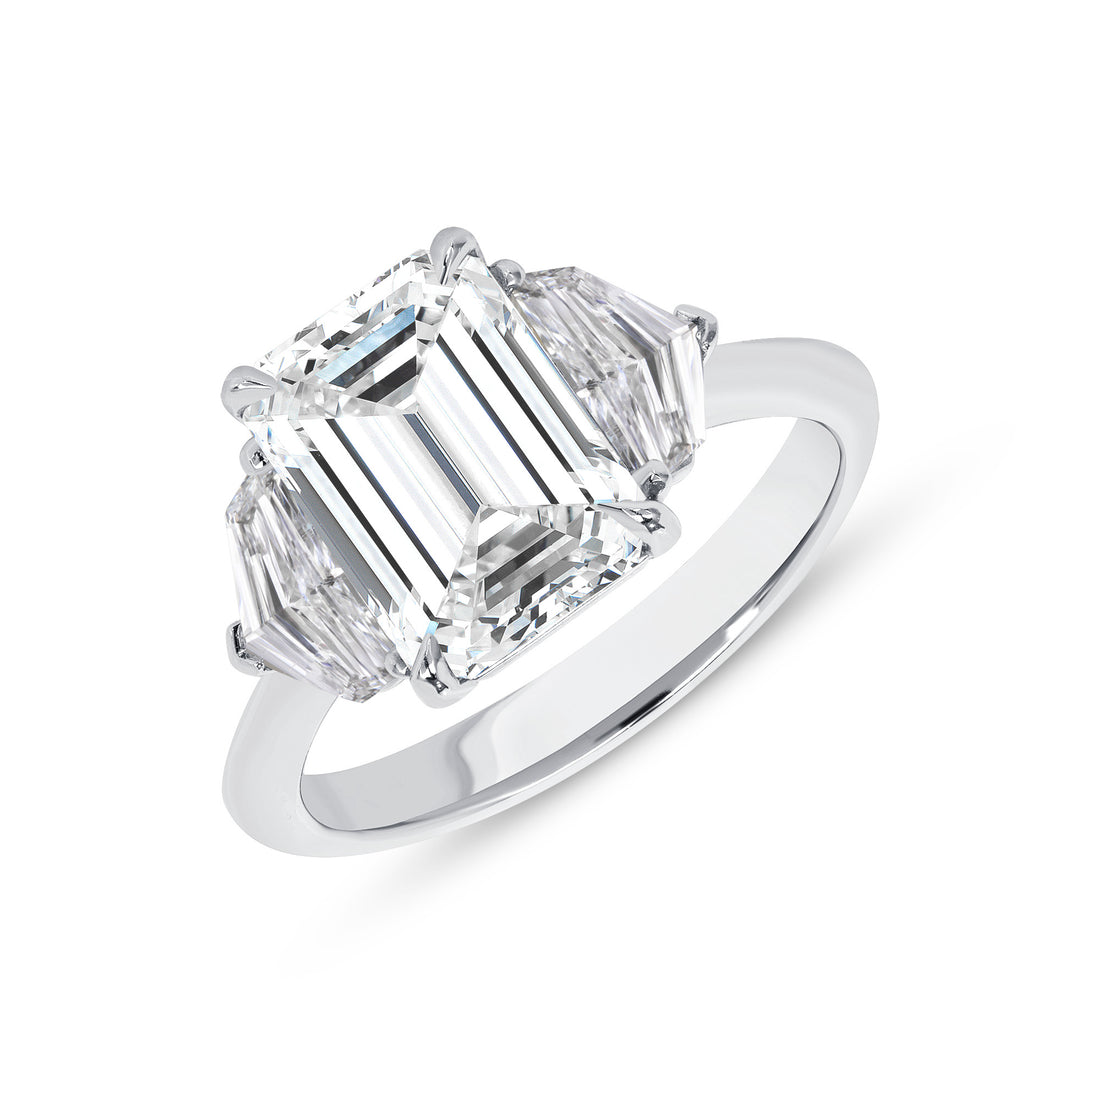 Emerald Cut Diamond Ring with Cadillac Side Stones